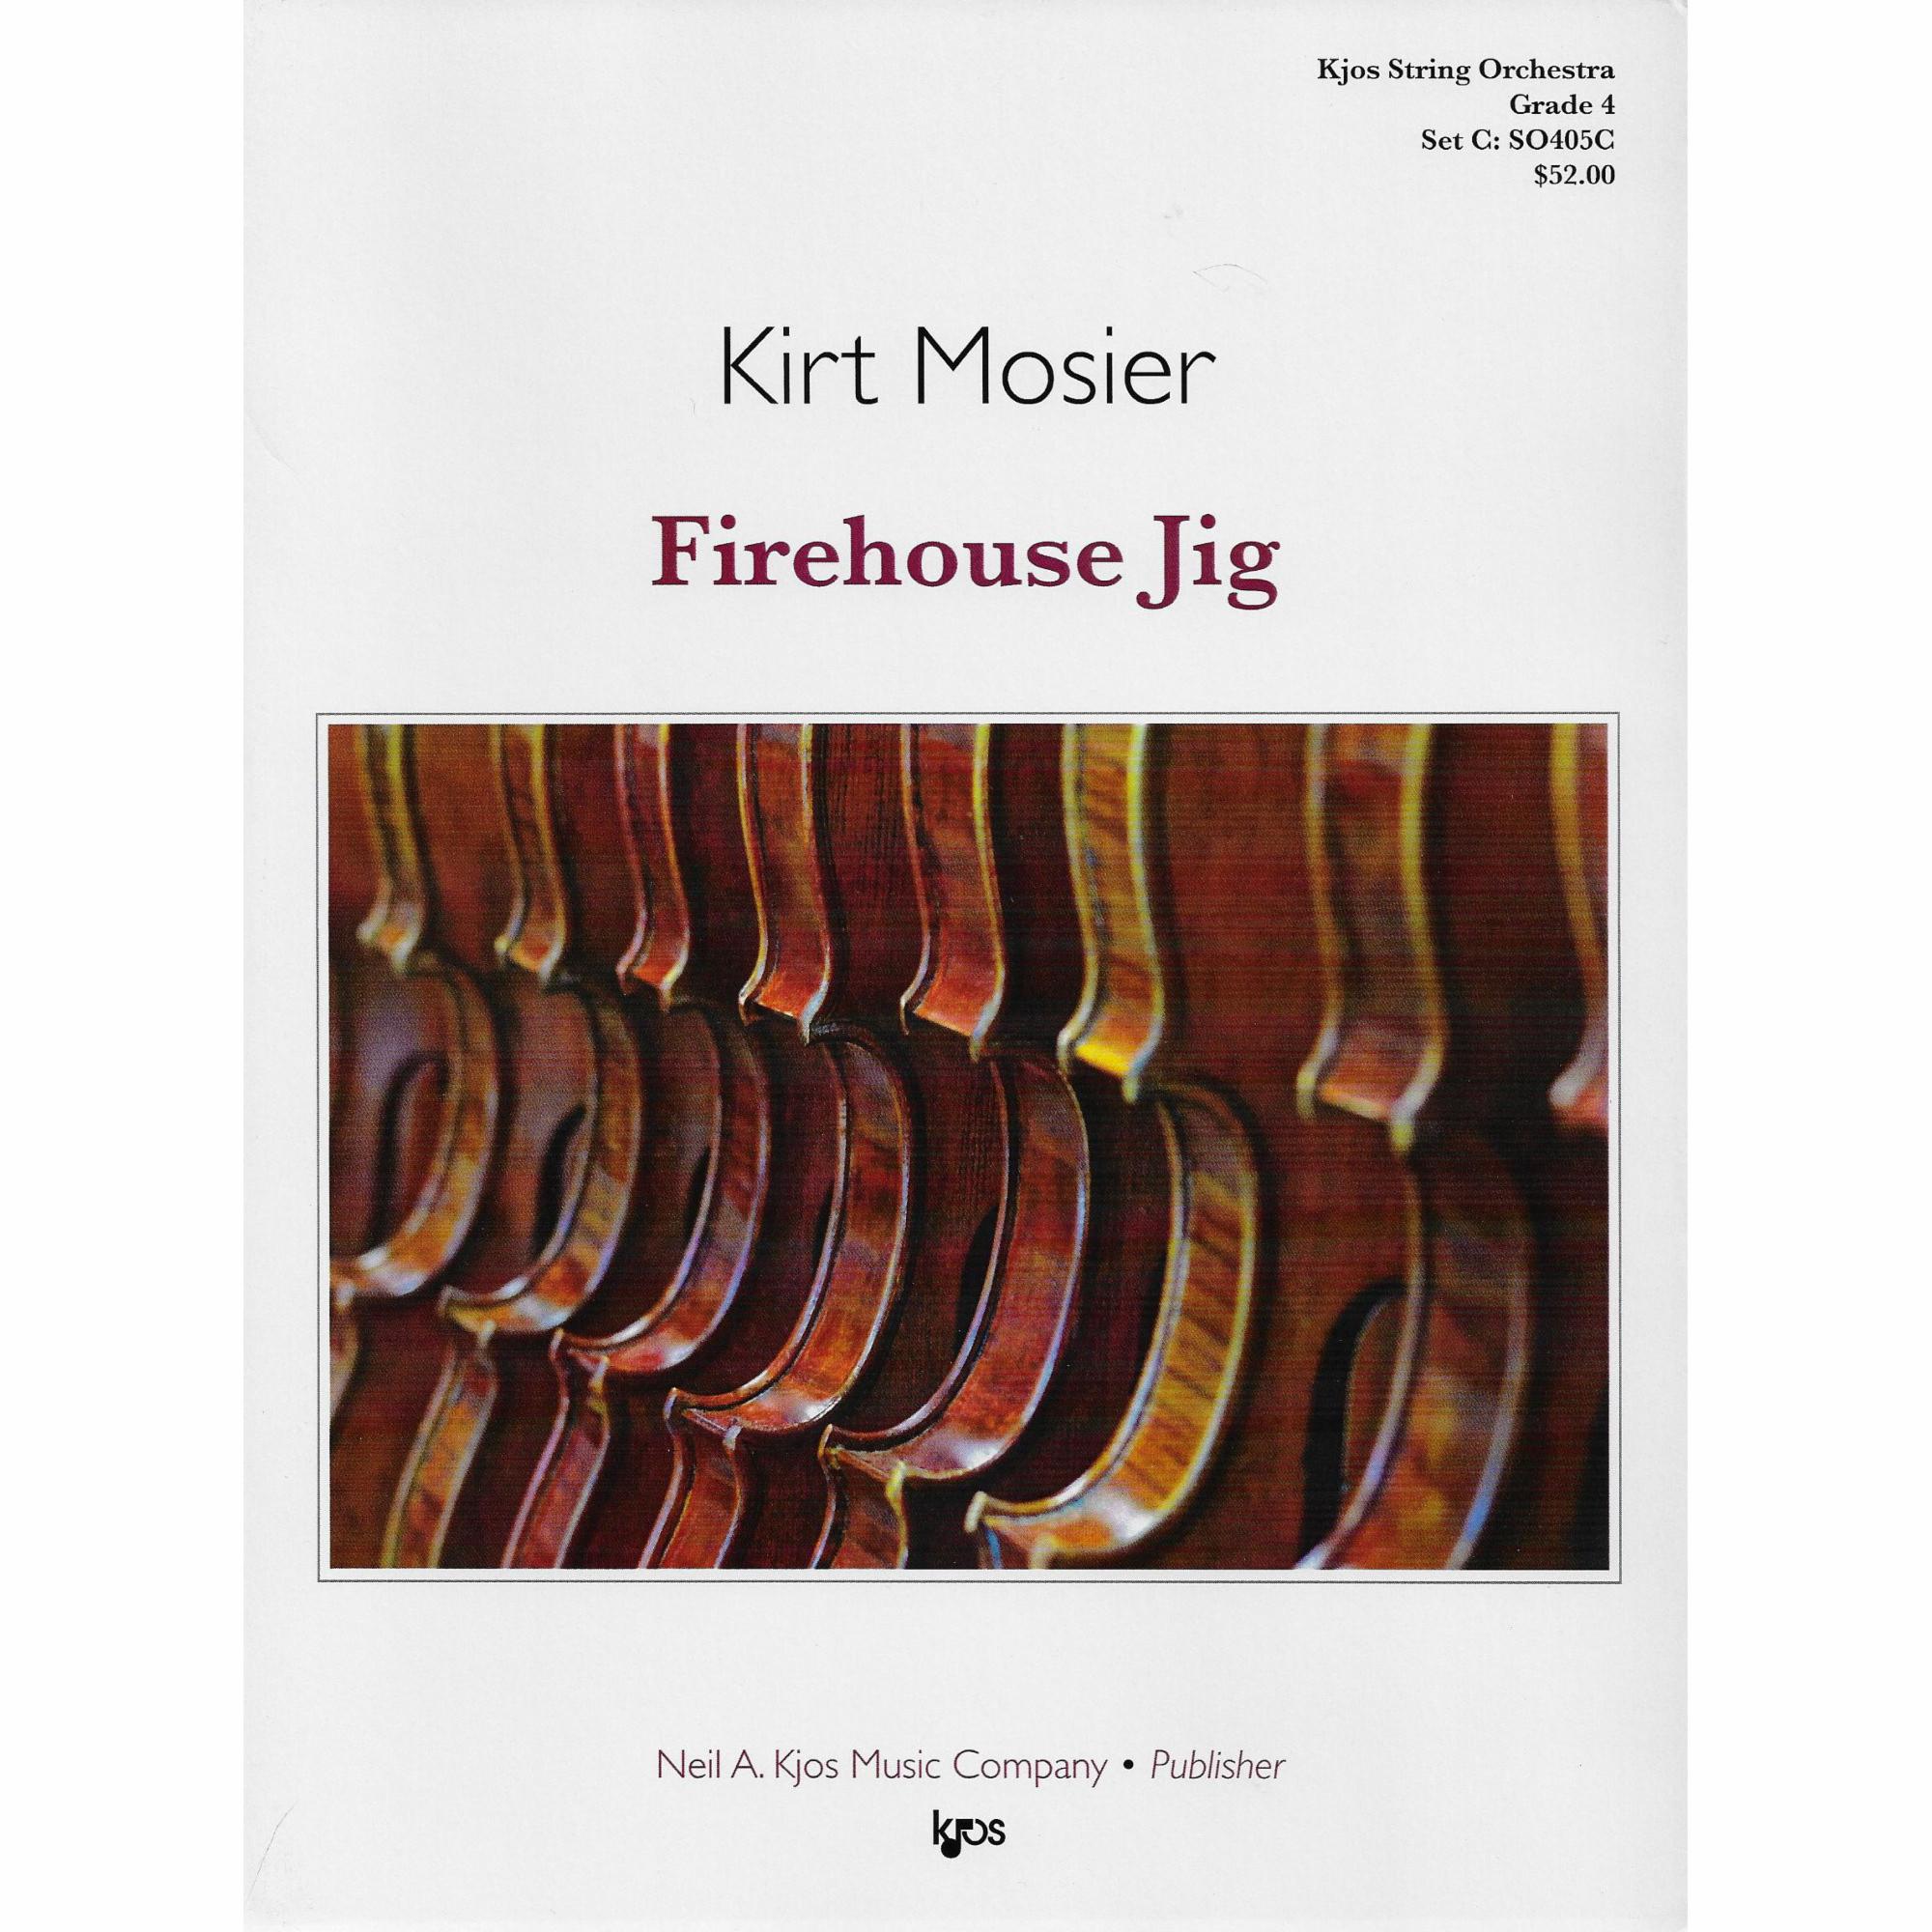 Firehouse Jig for String Orchestra